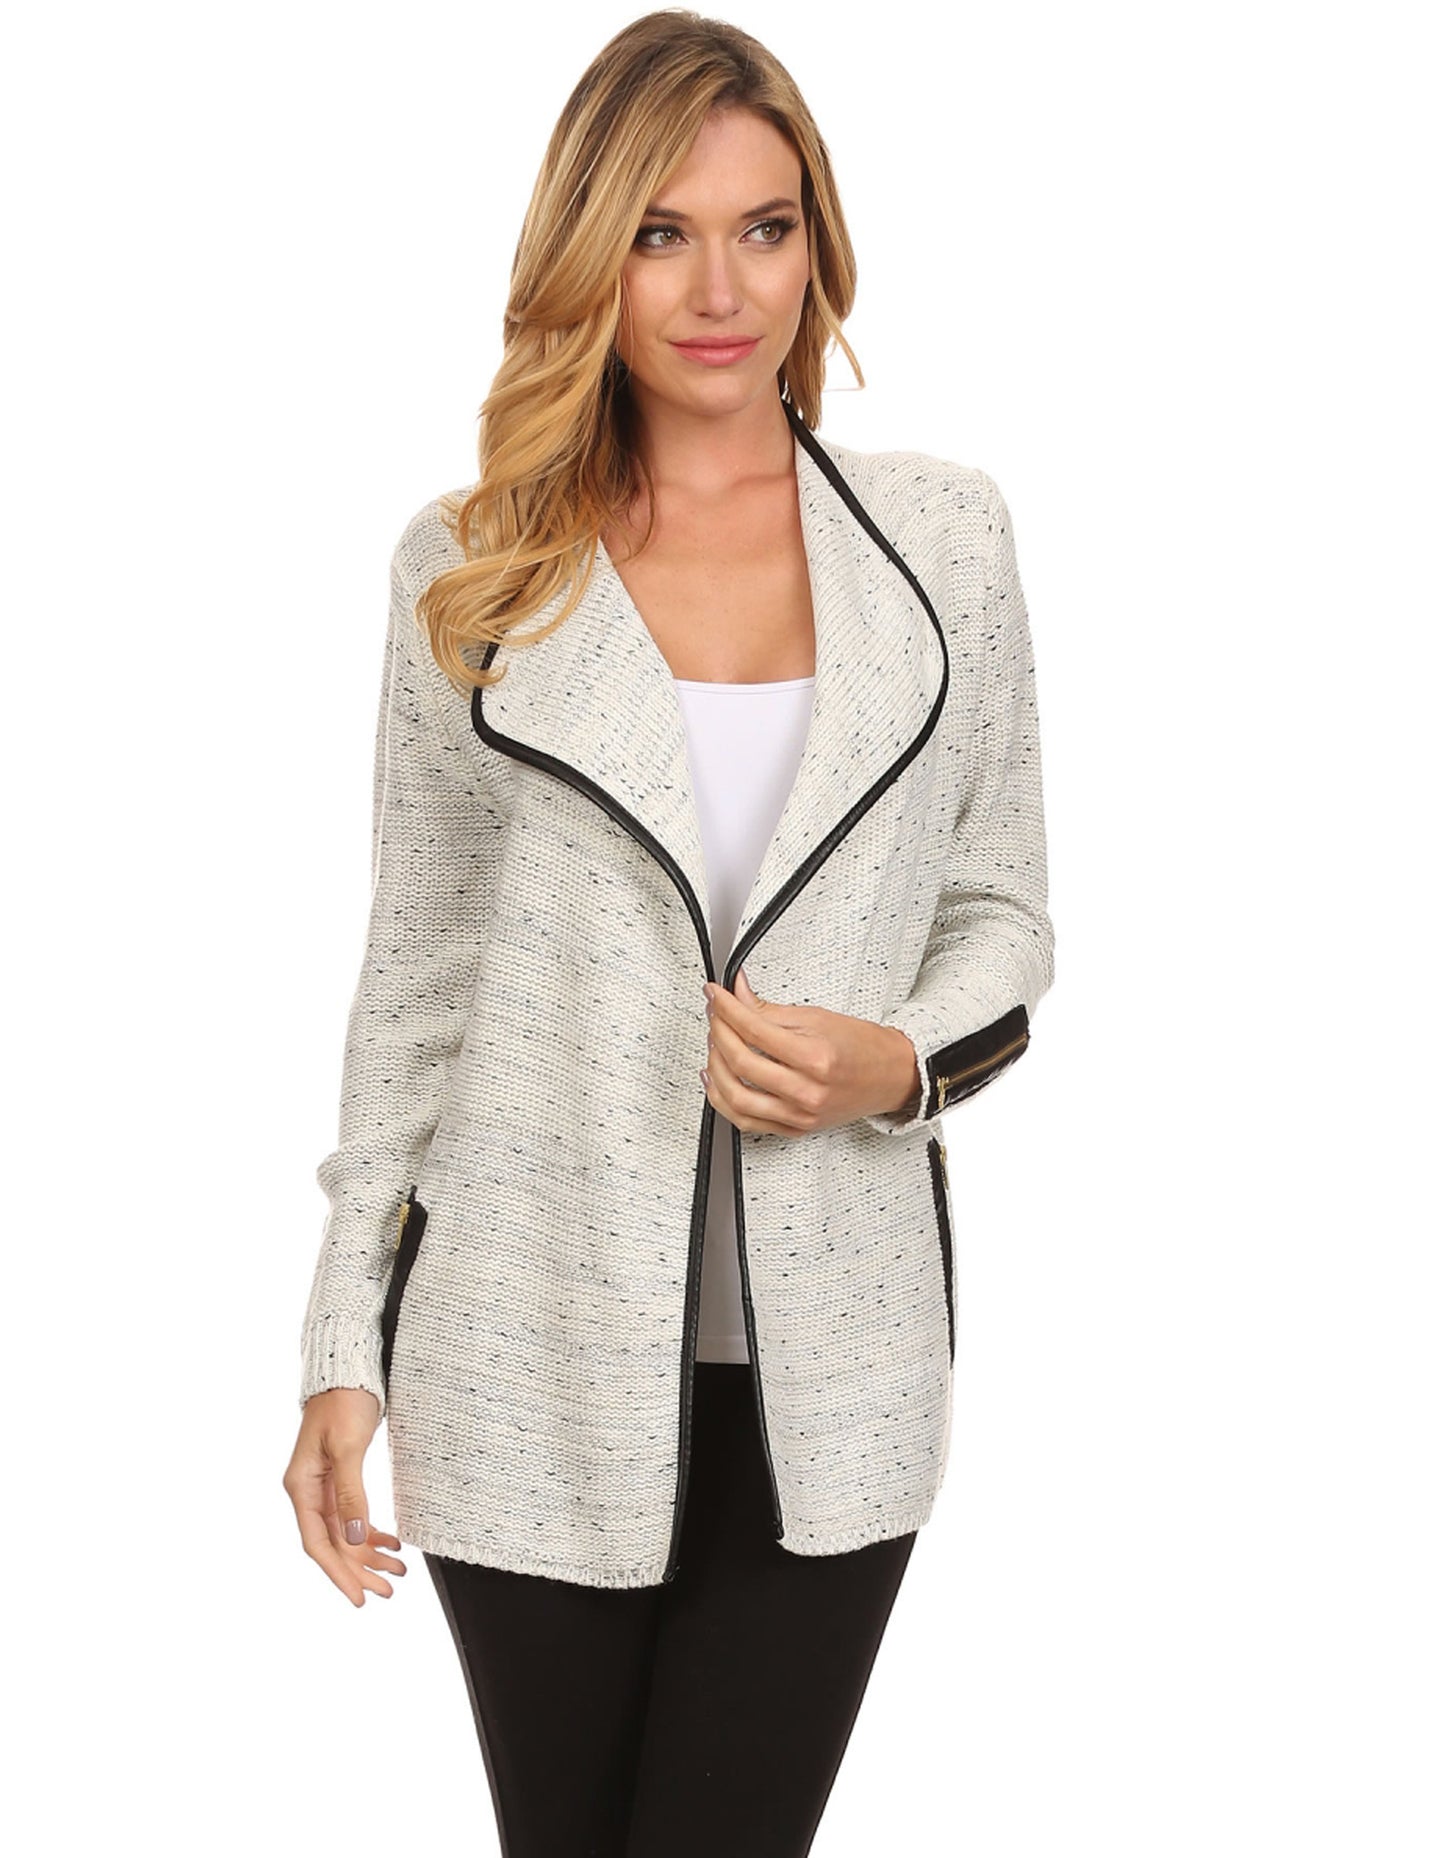 Glitter Textured White Cardigan with Zipper Detailed